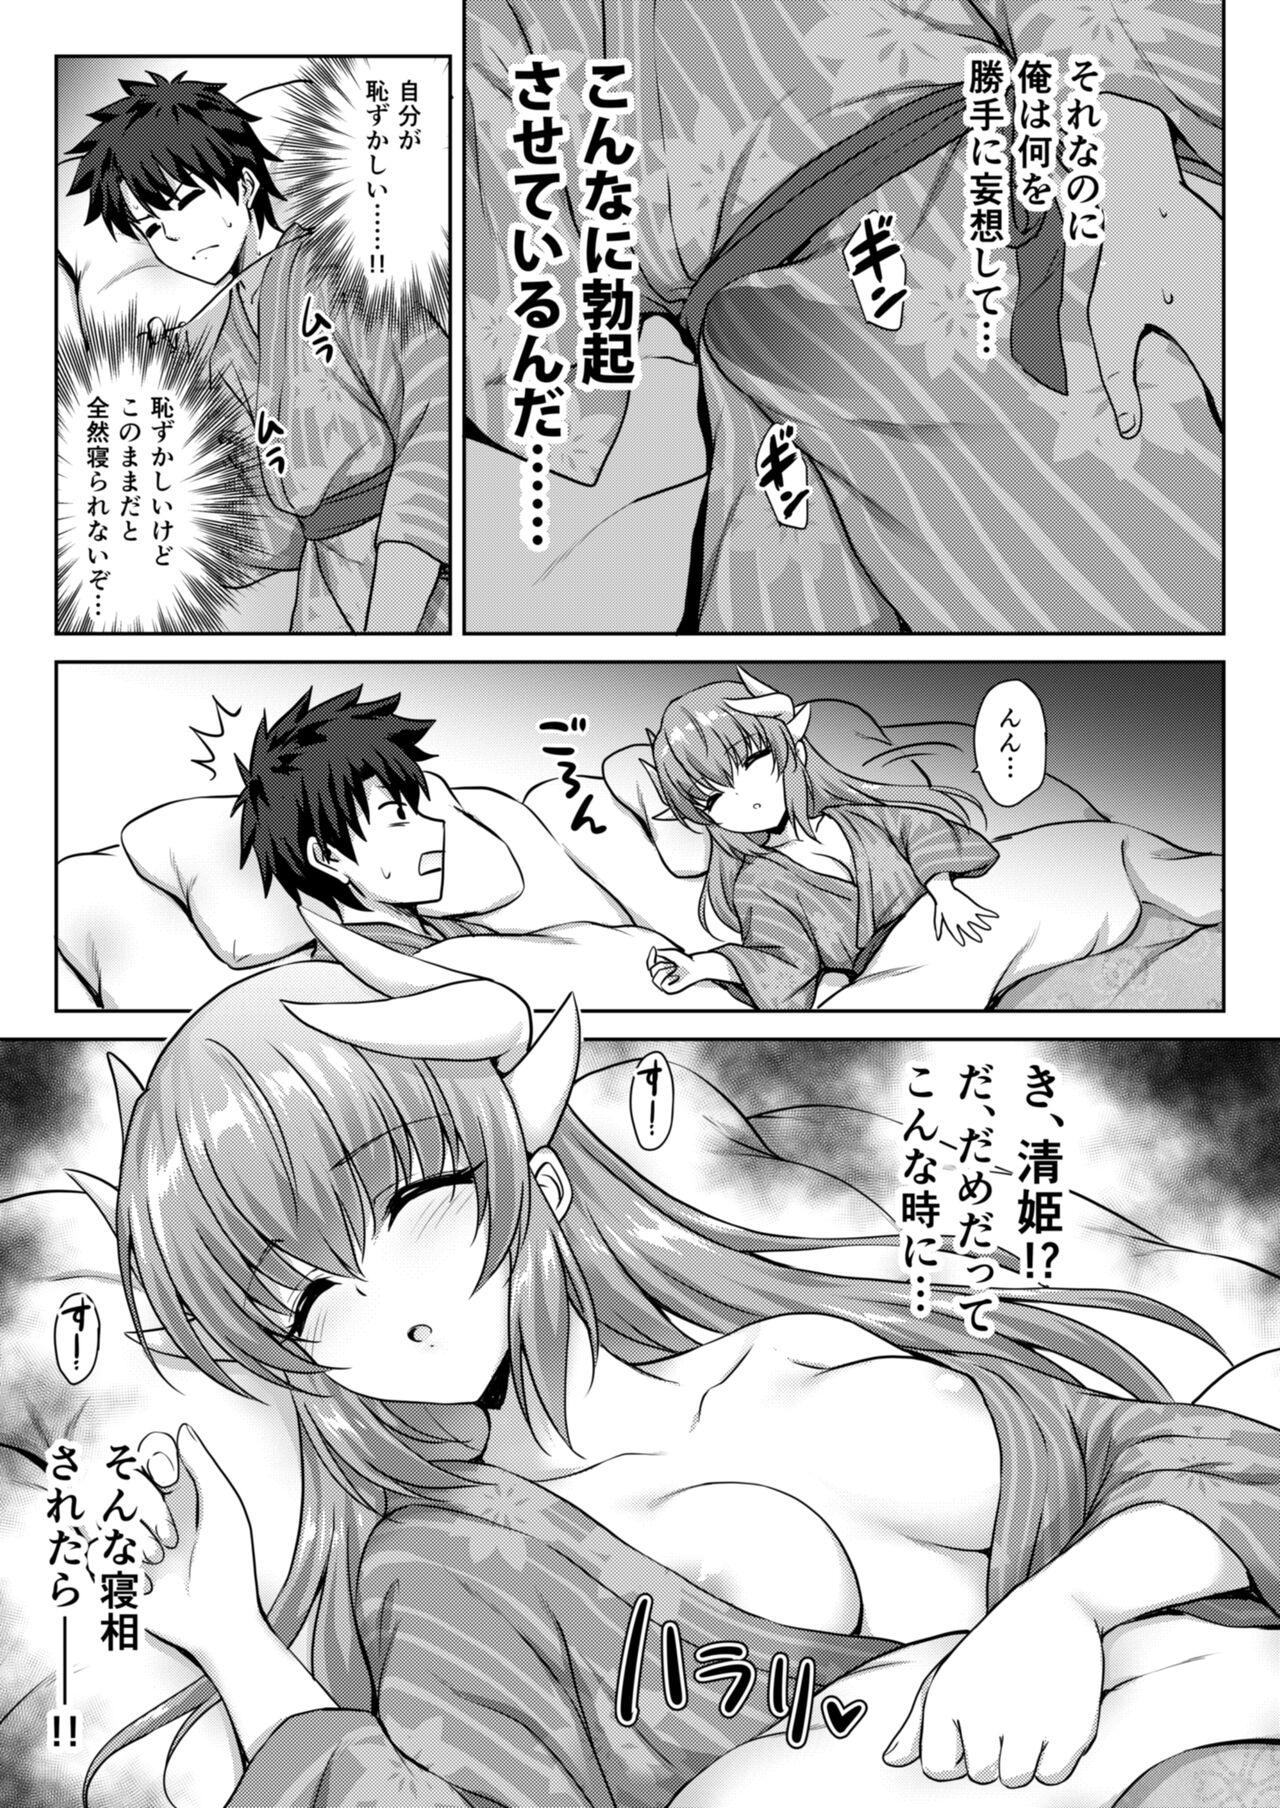 Amazing Kiyohime Onsen - Fate grand order Couple Porn - Page 4